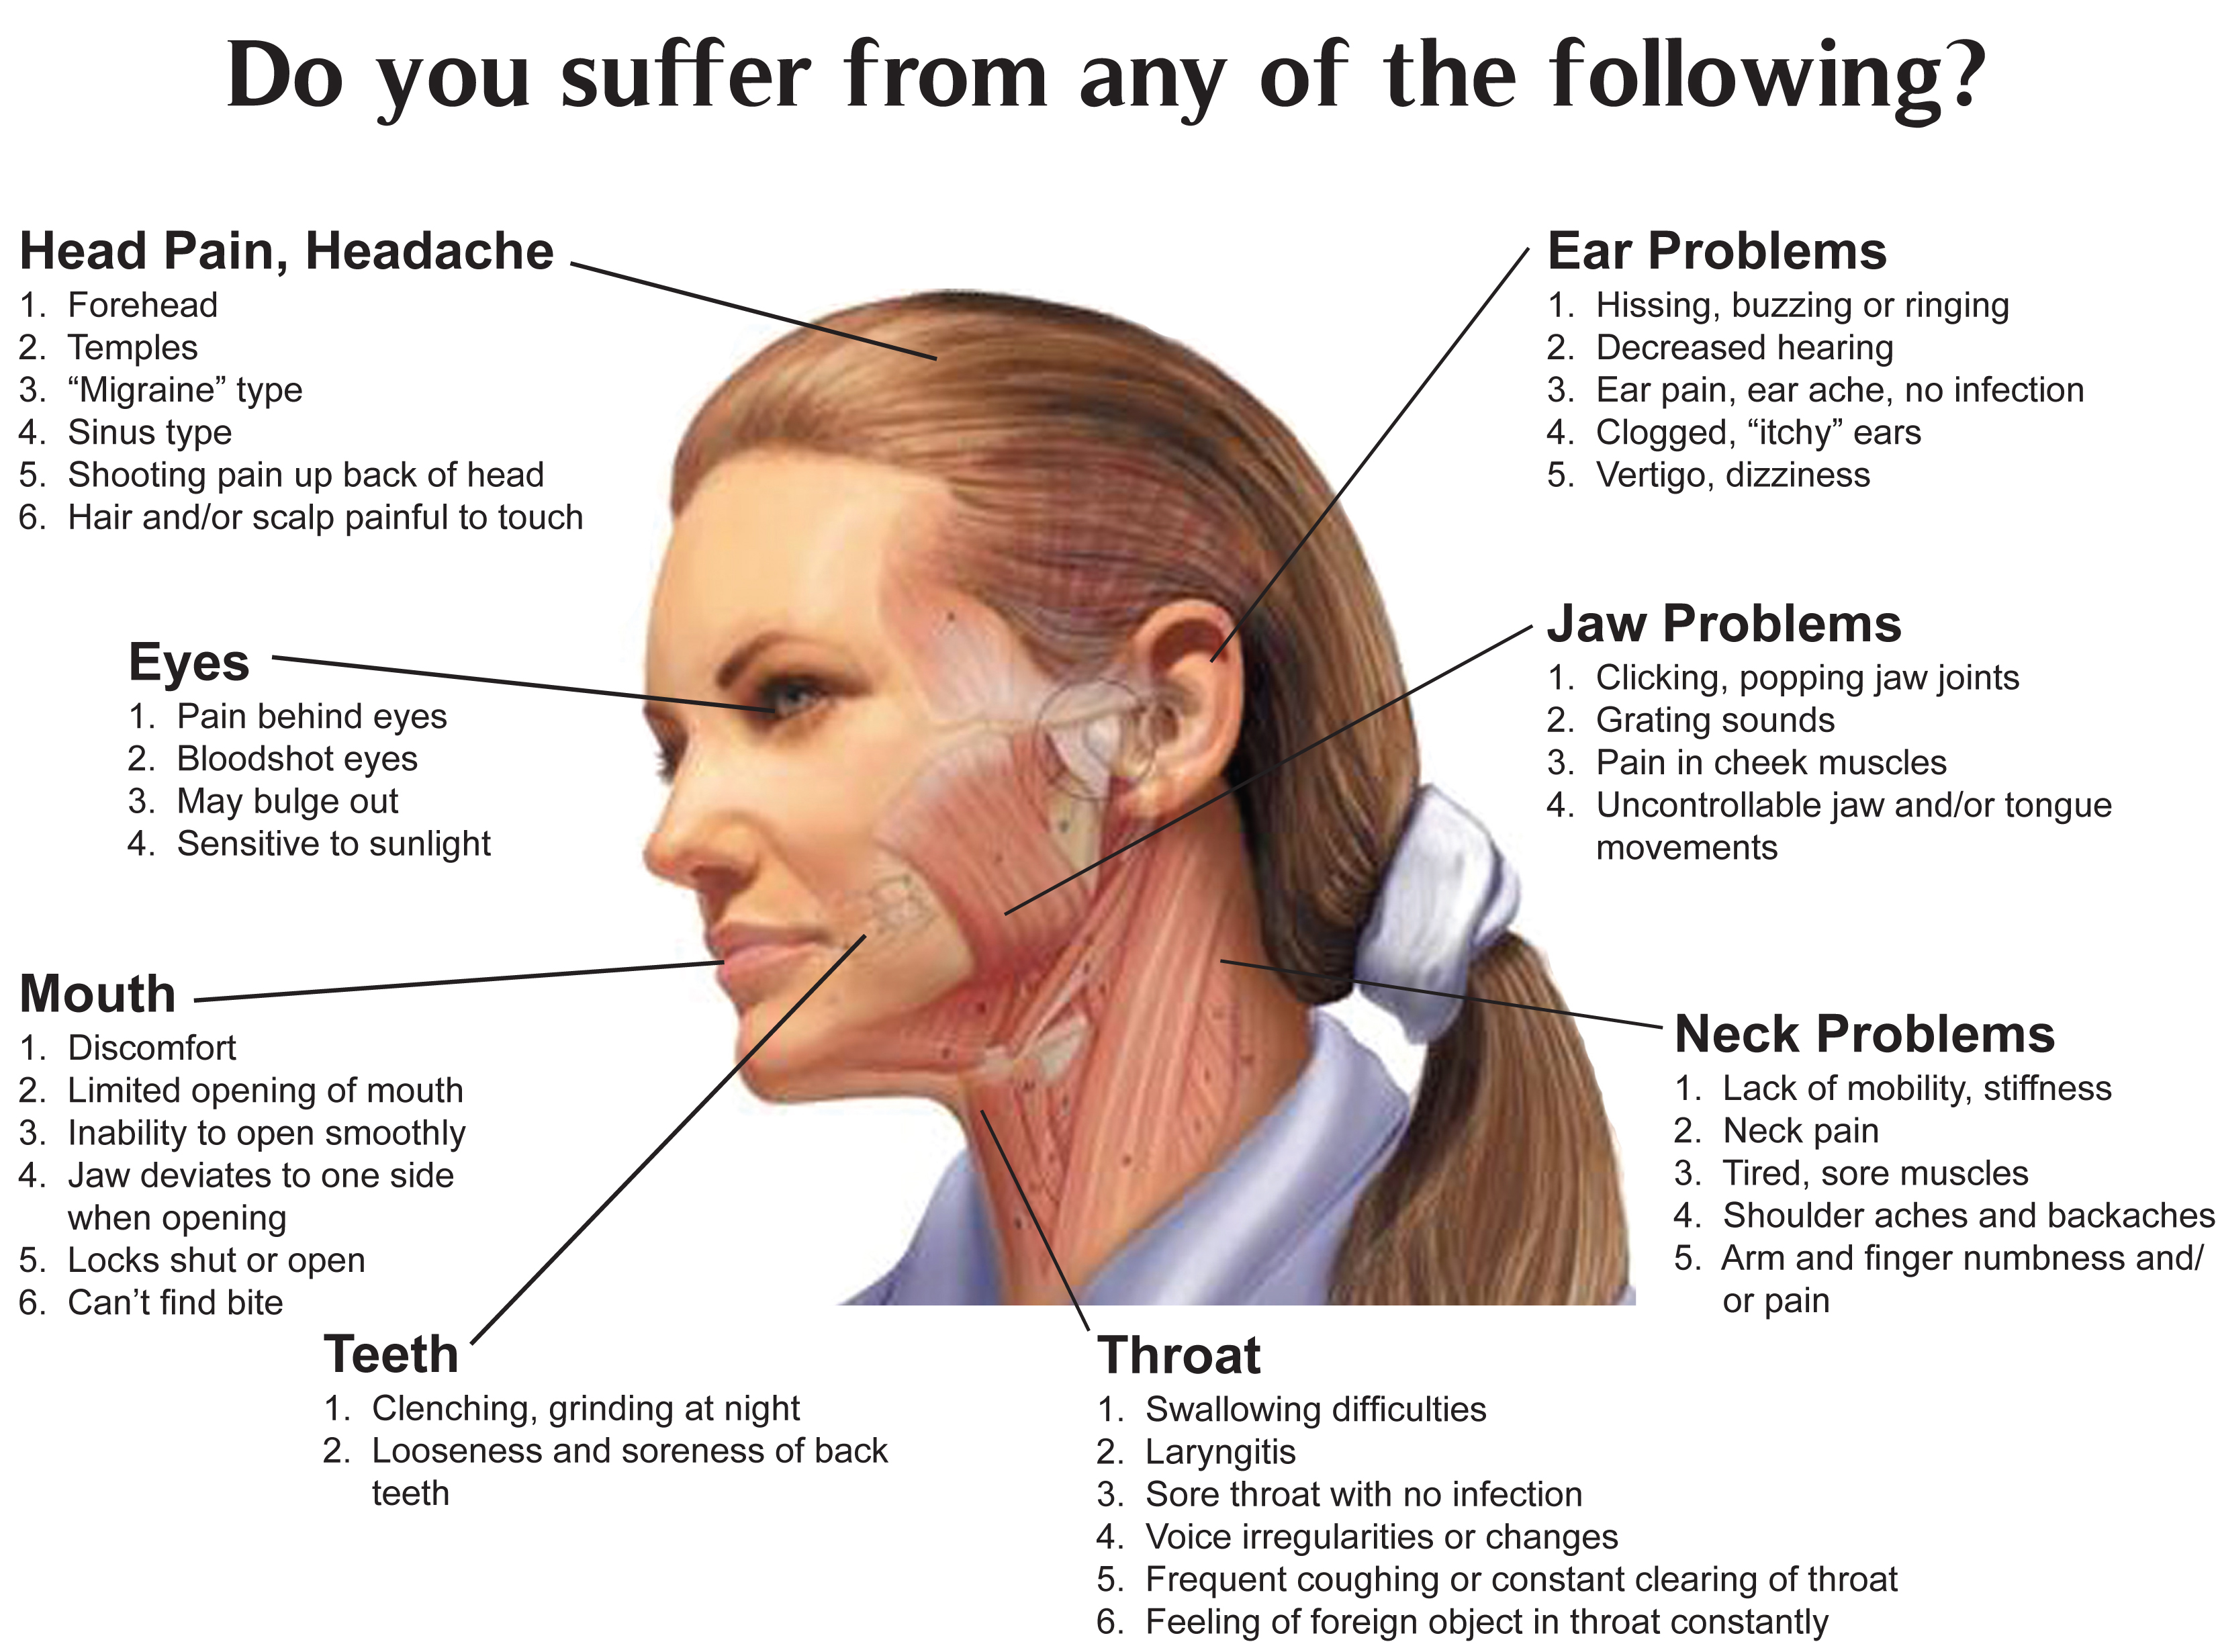 Do you suffer from TMJ? Chiropractic can help.